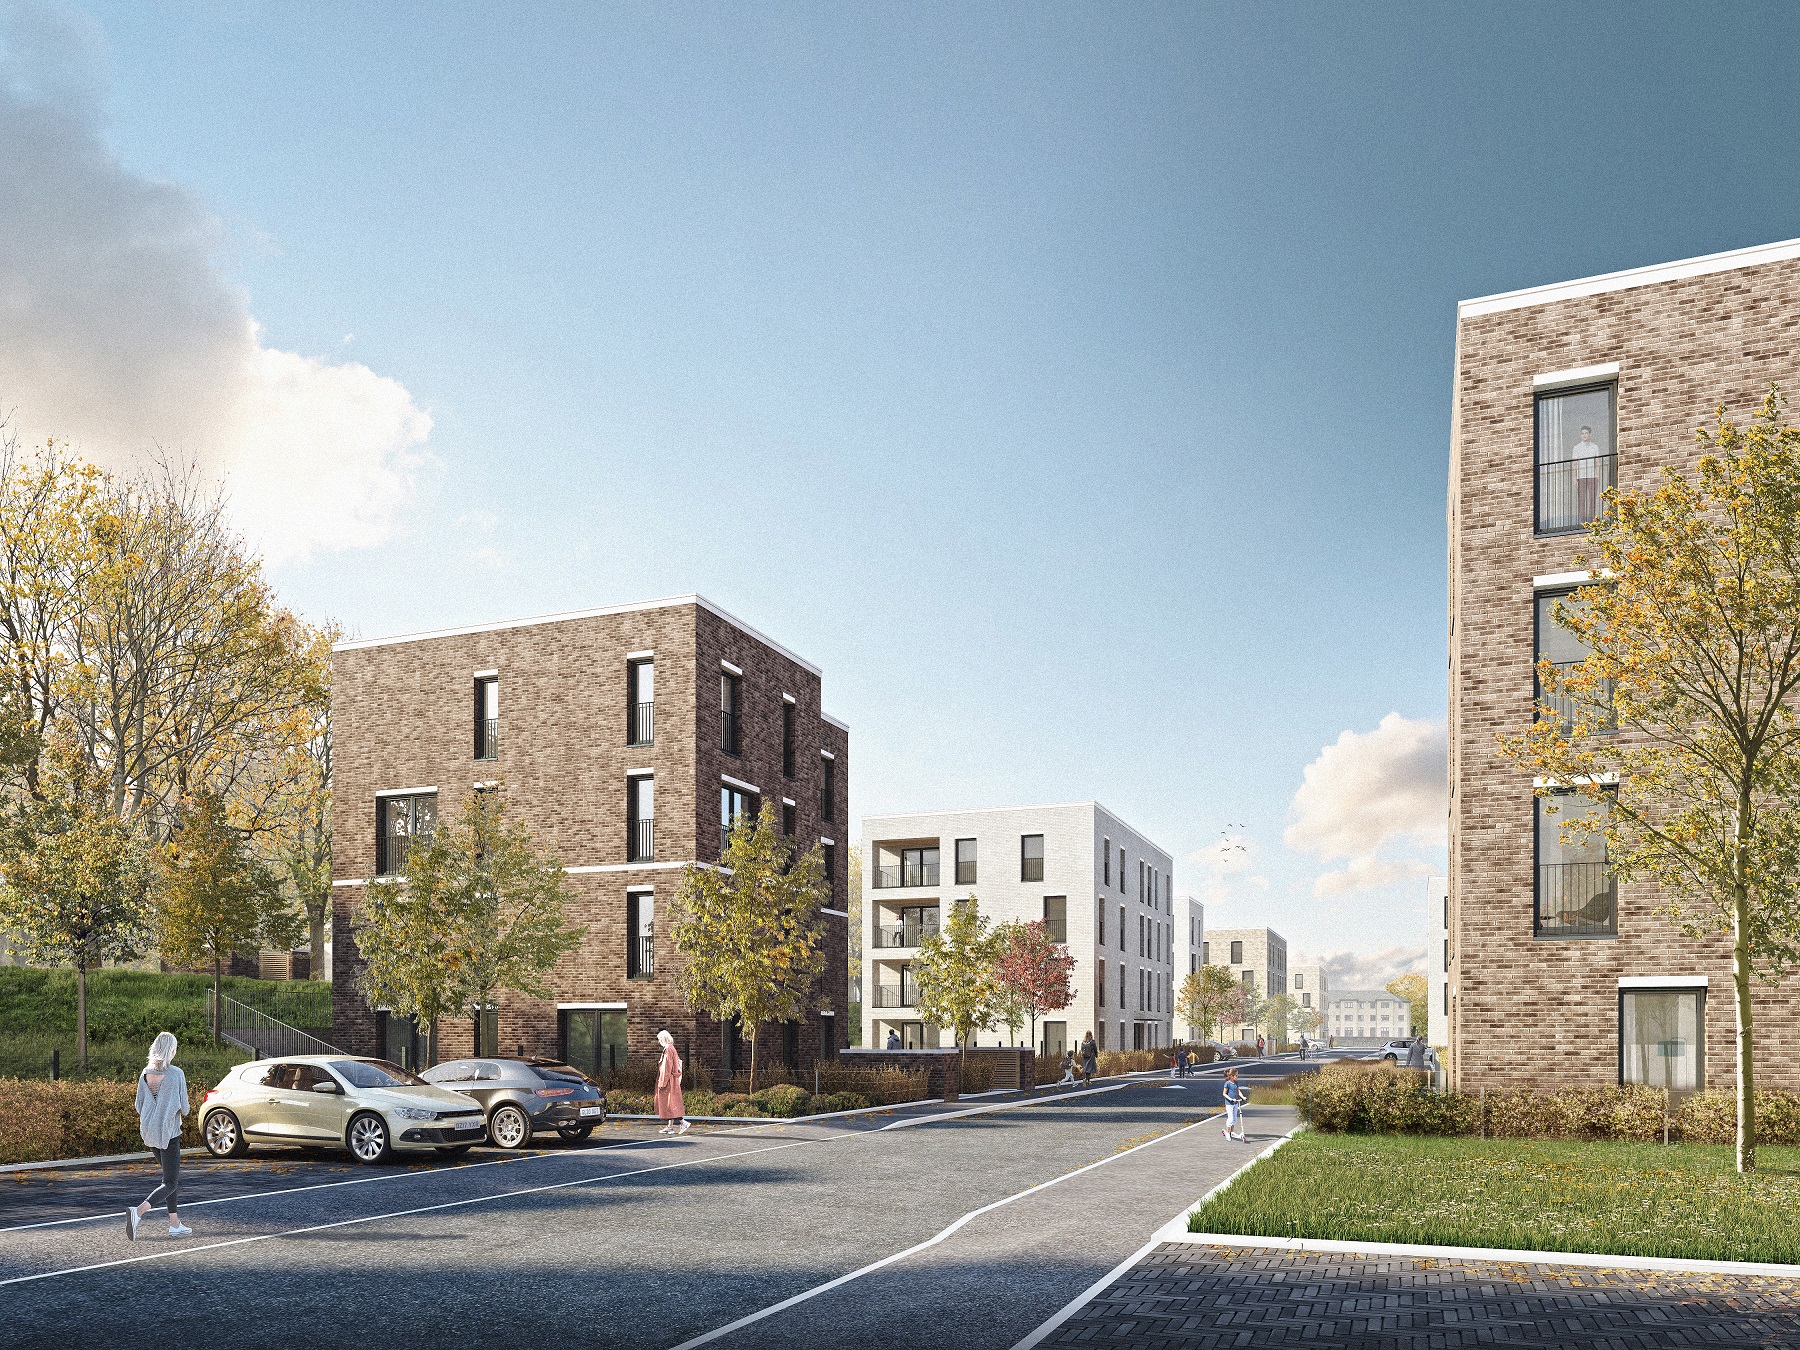 Final affordable homes in Pollockshields set for construction